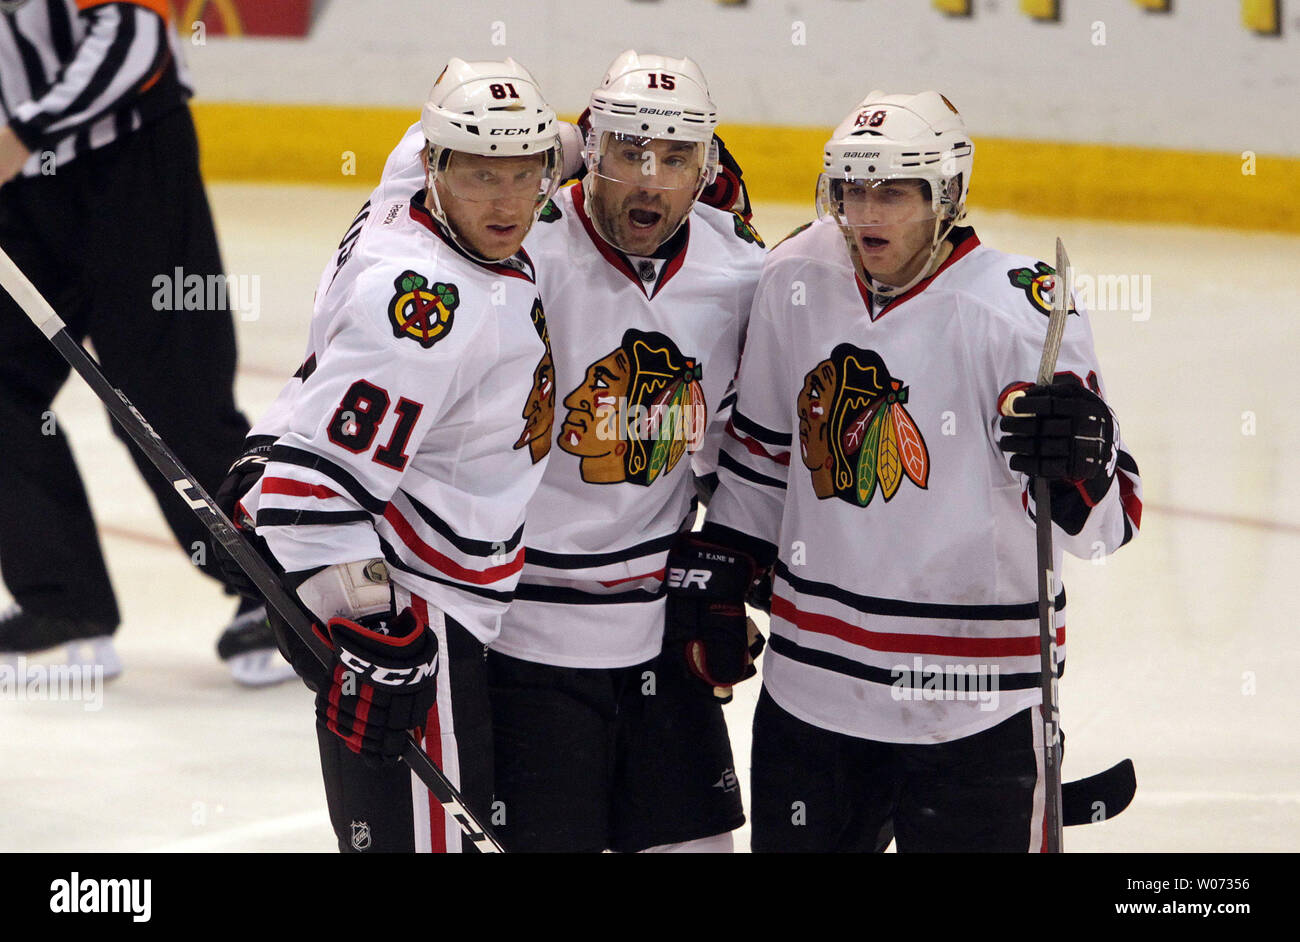 Chicago Blackhawks Marian Hossa (L) and Patrick Kane (R) celebrate with teammate Andrew Brunette after his third period goal against the St. Louis Blues at the Scottrade Center in St. Louis on March 6, 2012.  St. Louis won the game 5-1.  UPI/Bill Greenblatt Stock Photo